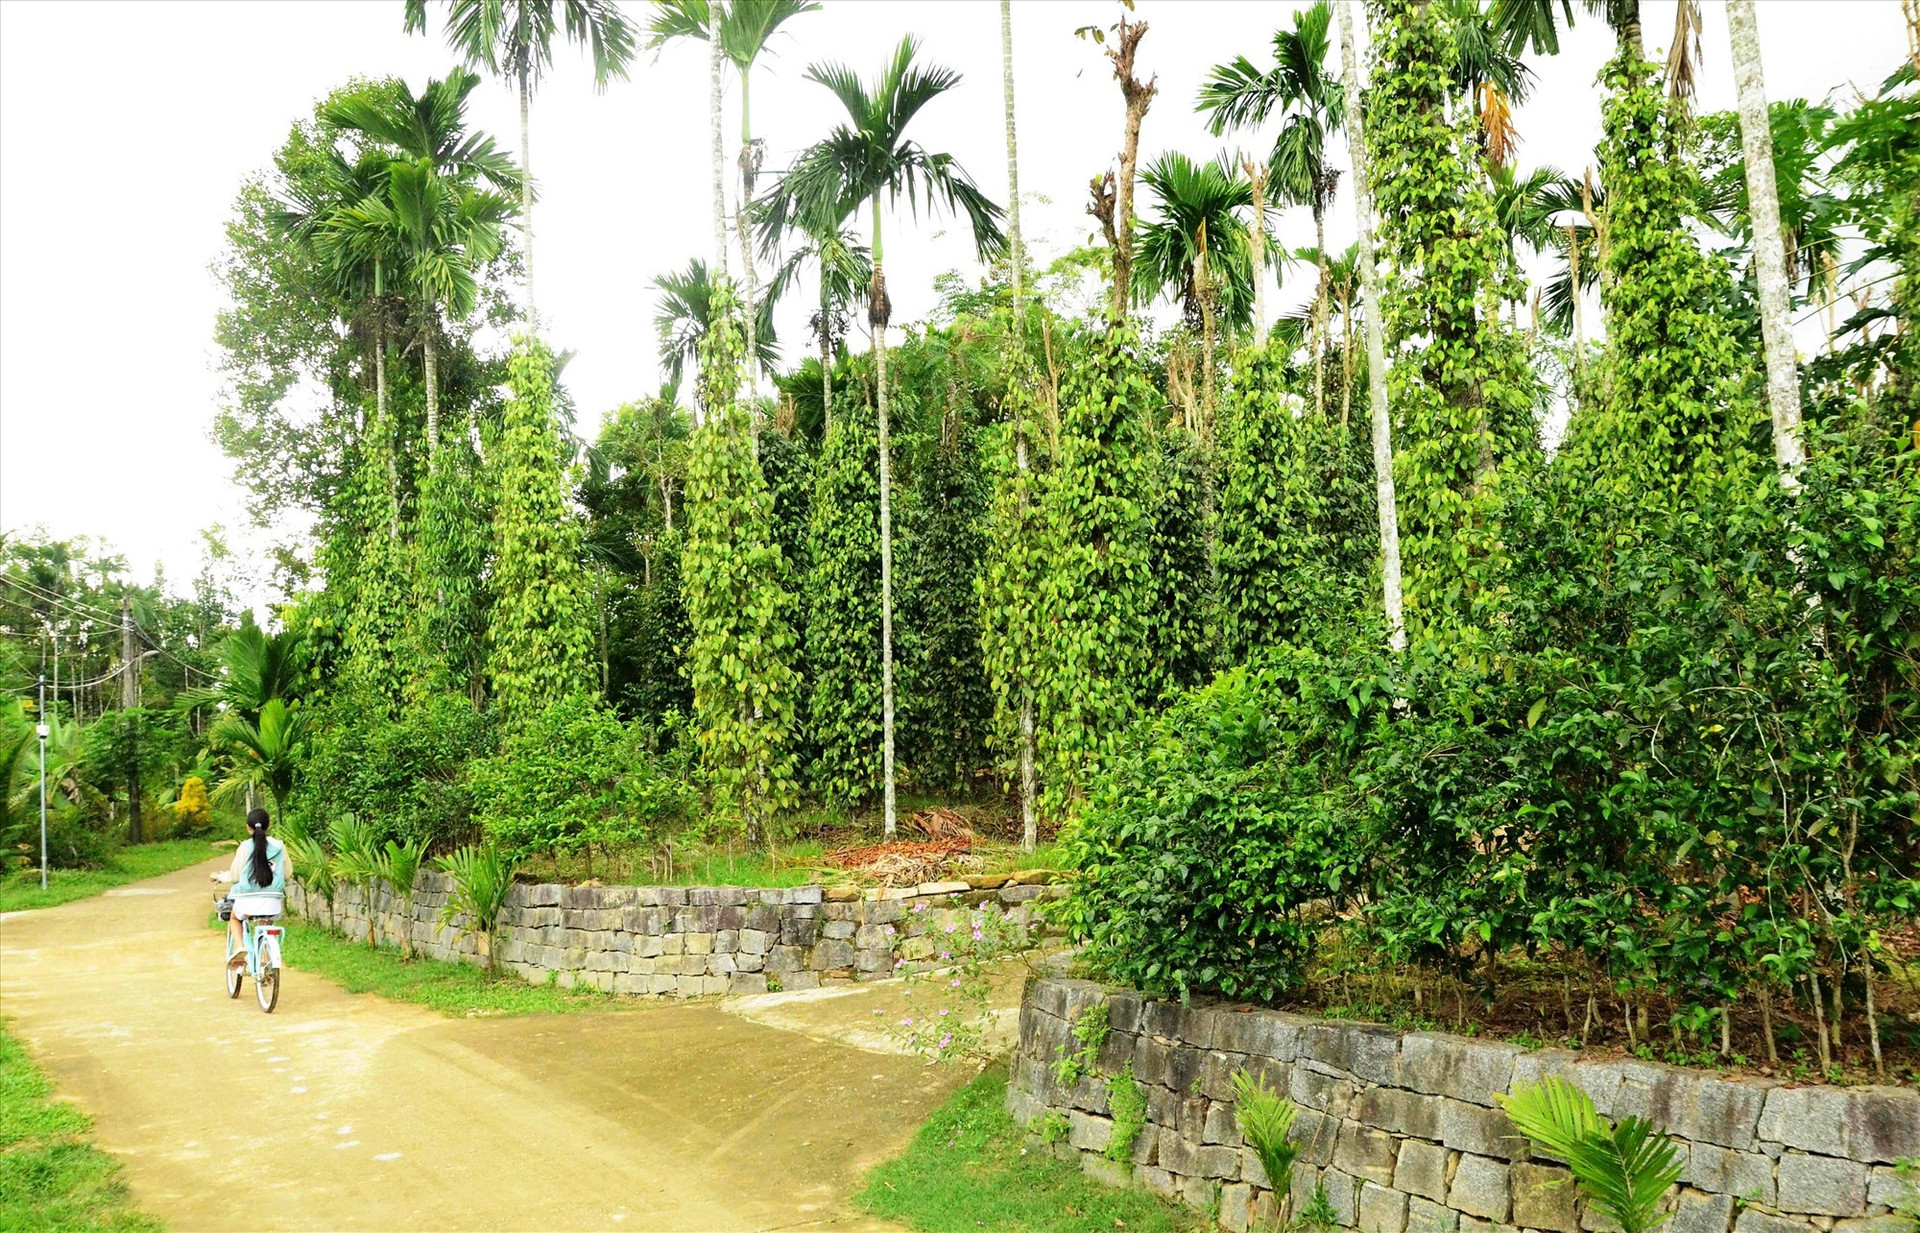 In Loc Yen, visitors can experience the clean environment with the fresh air.